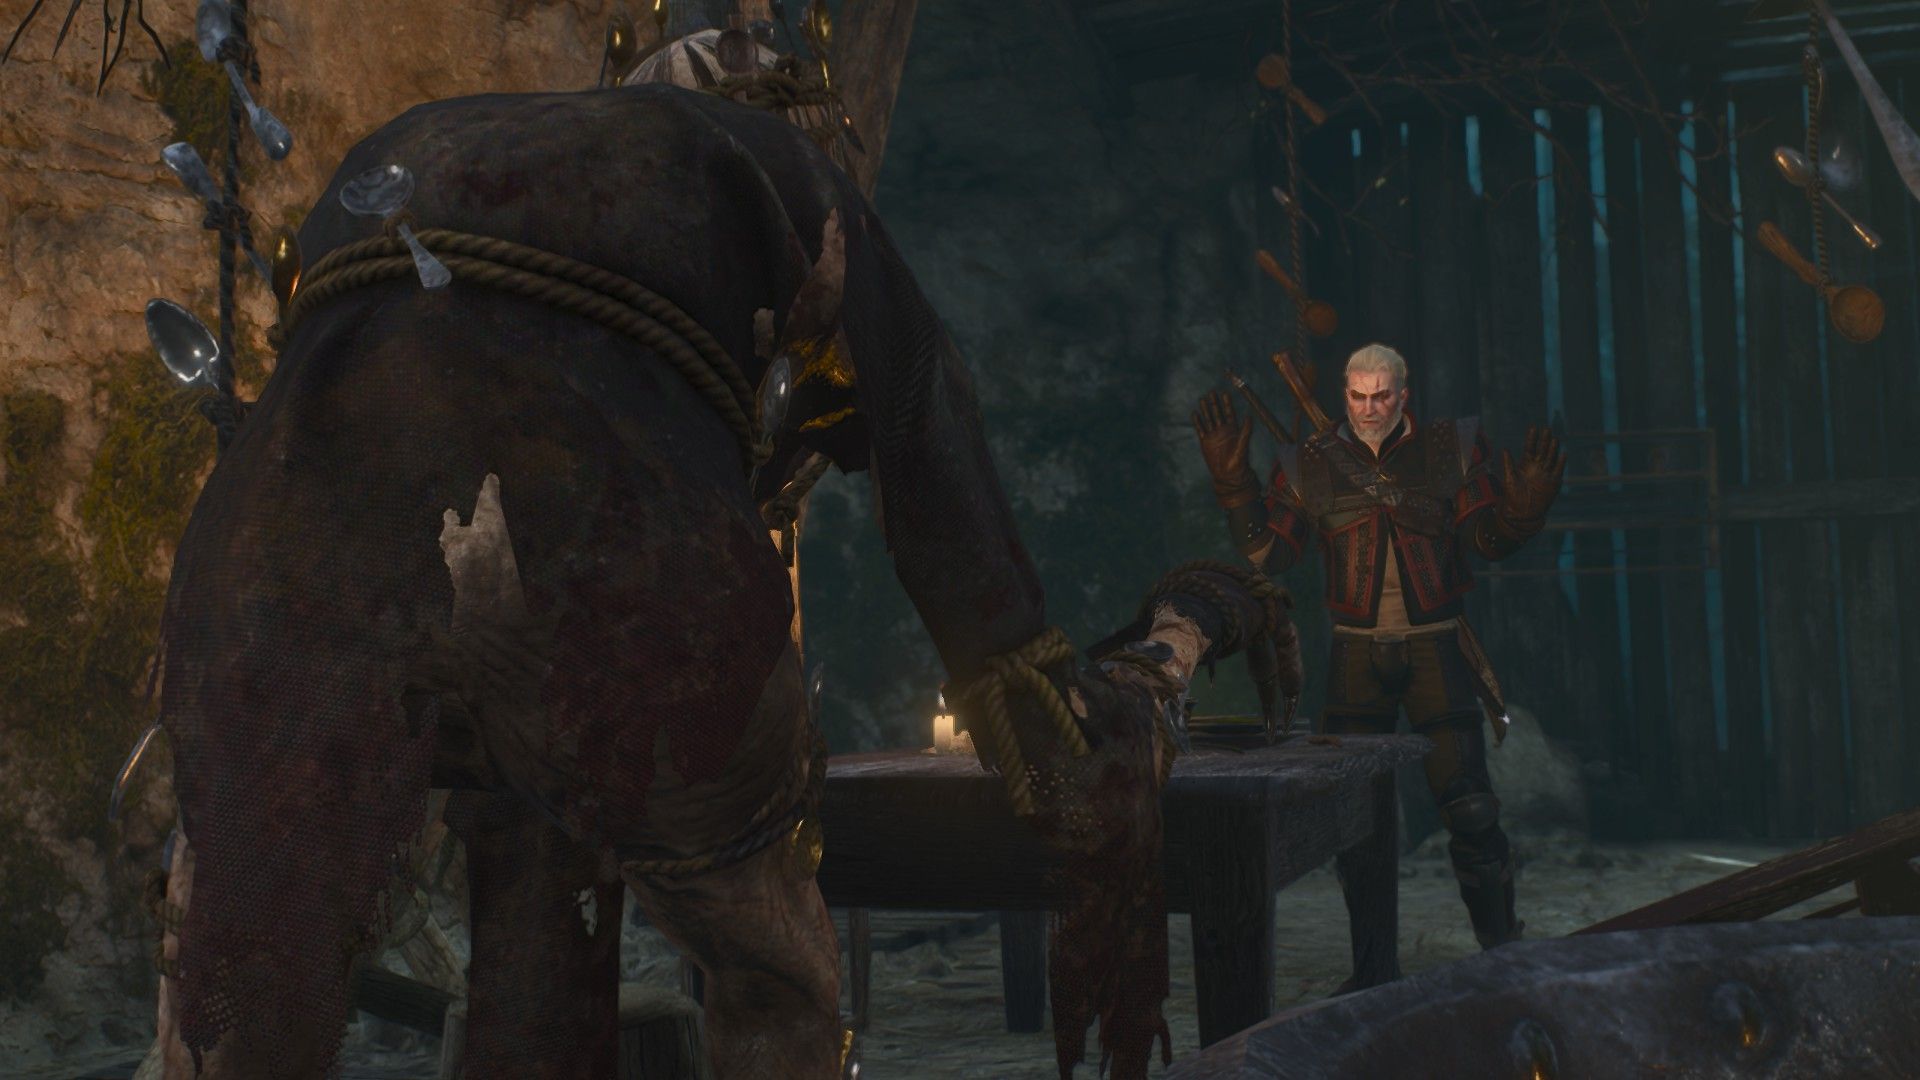 Geralt walks towards the monster with his hands up and tries to talk to it.